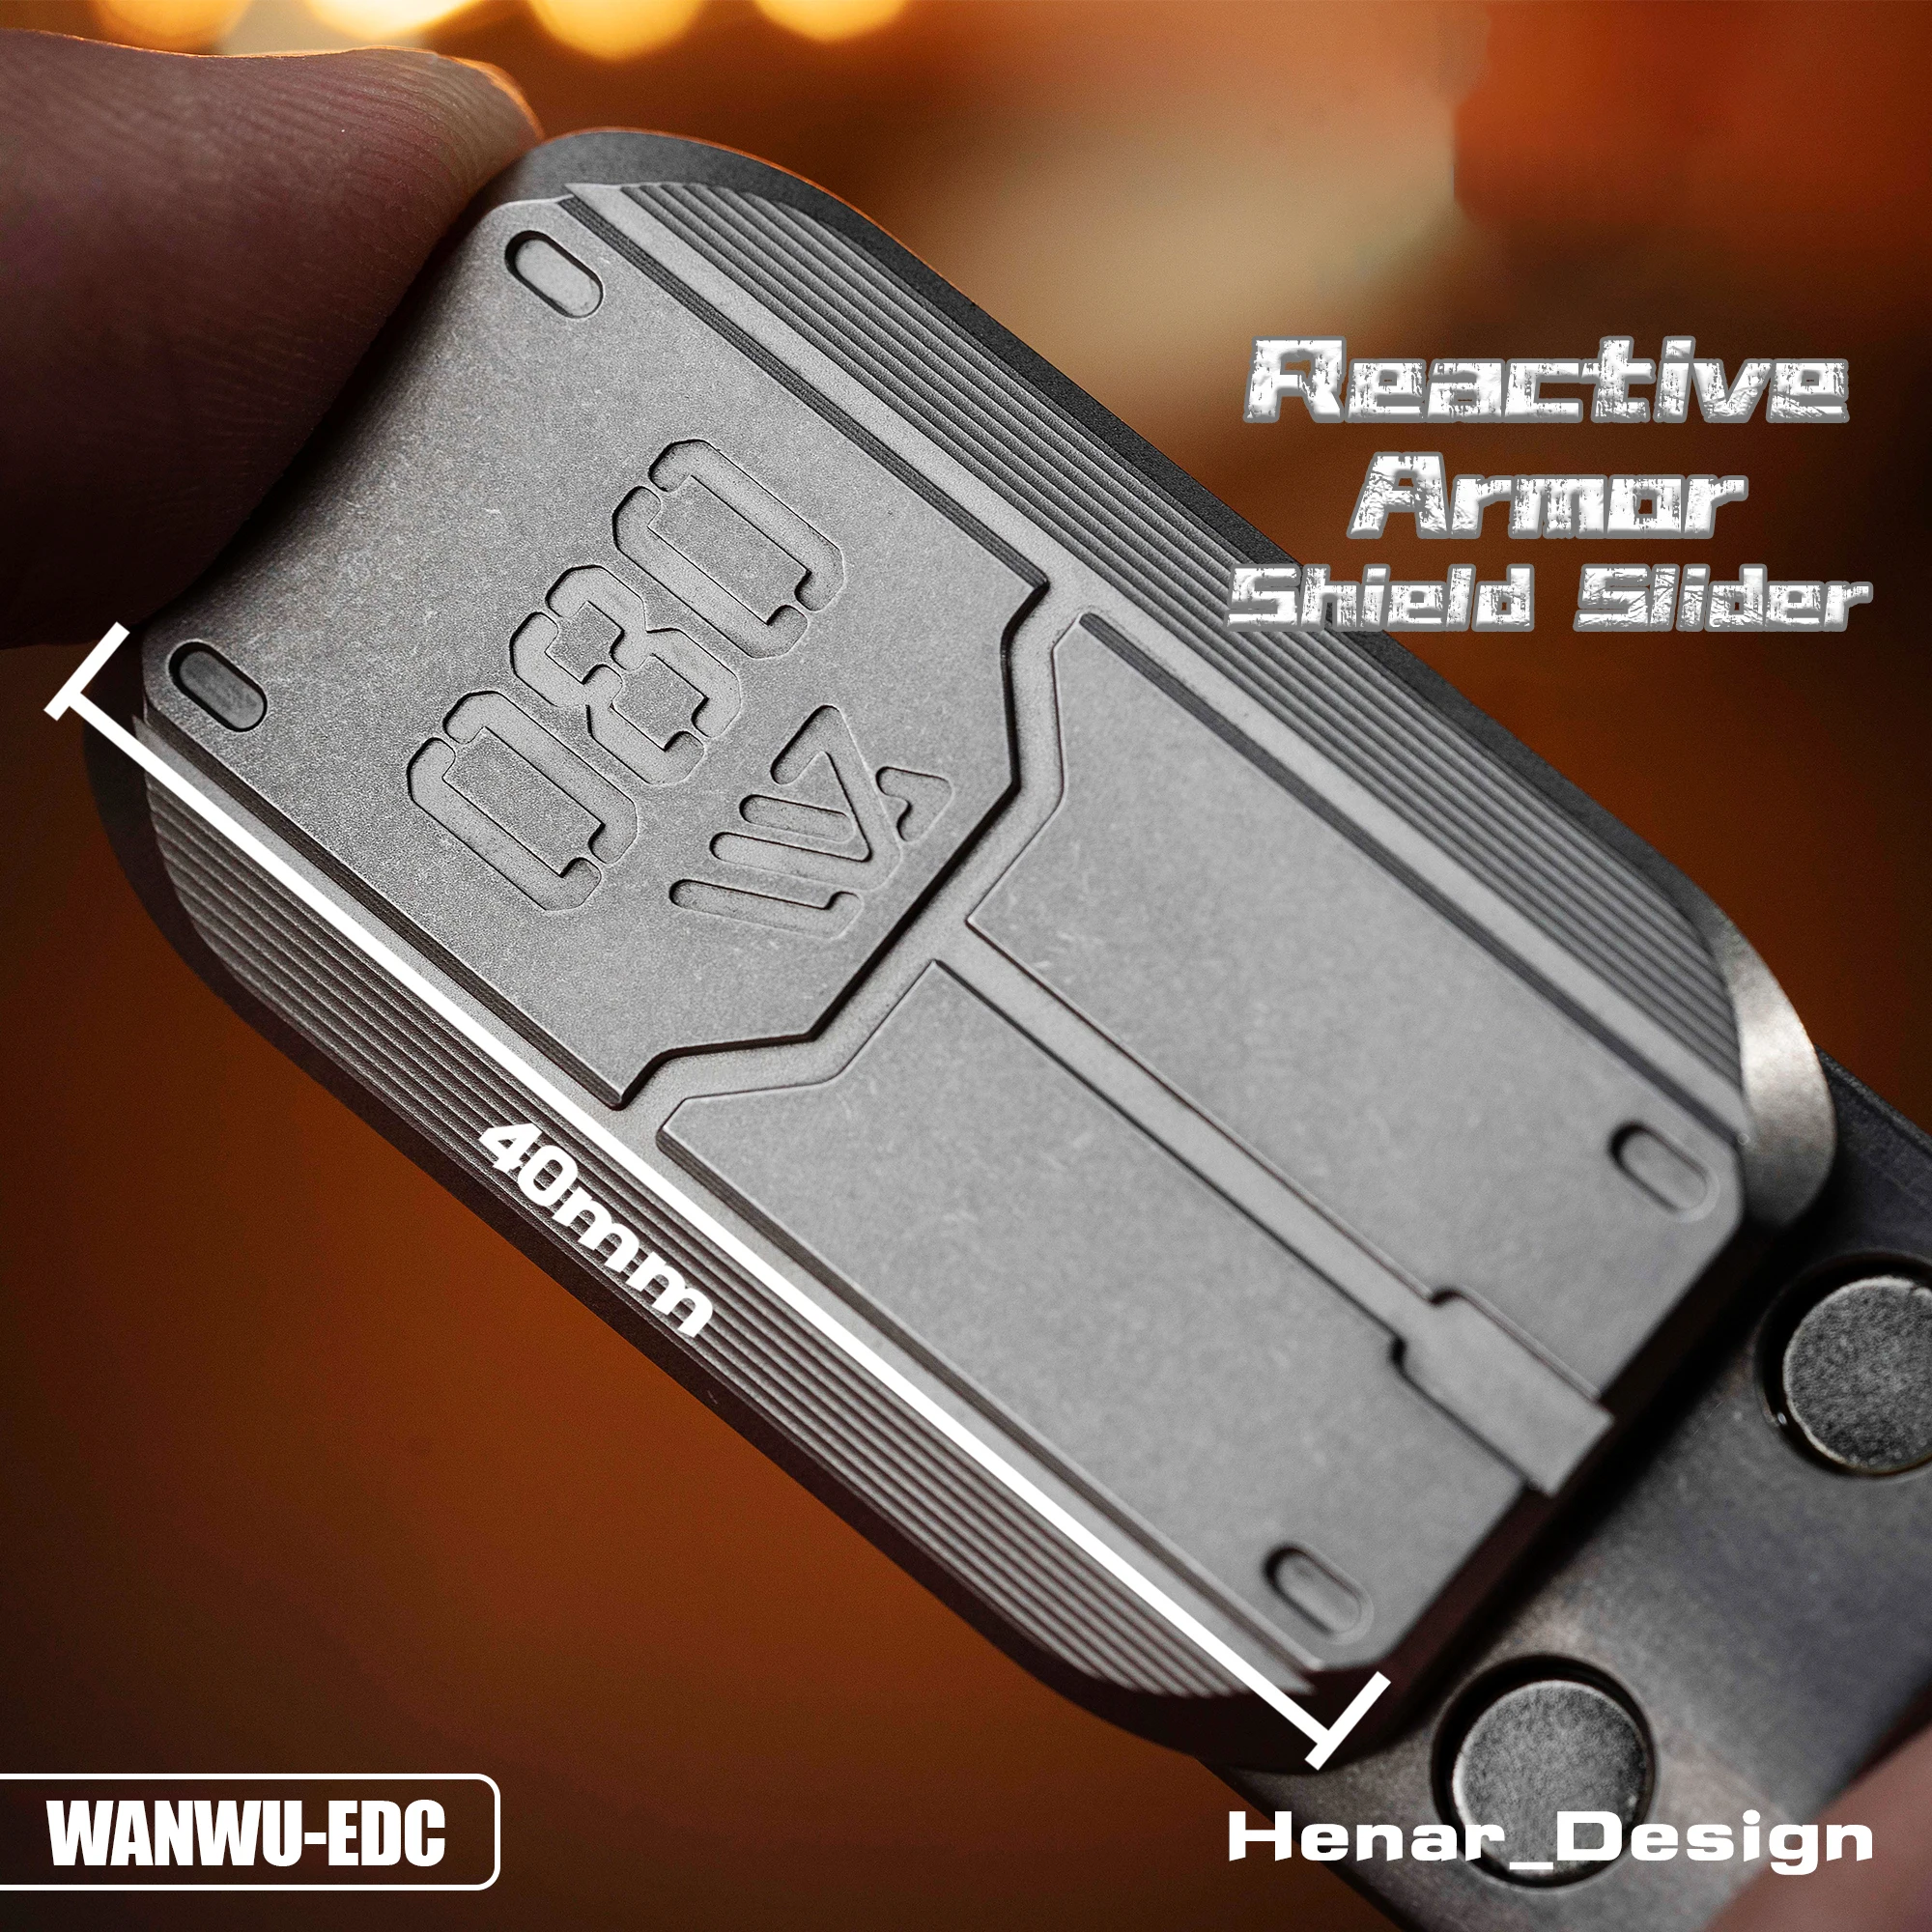 WANWU-EDC Reactive Armor Shield Slider Defense Tungsten Copper Moon Surface Stonewashed Tech EDC Adult Decompression Toy enlarge